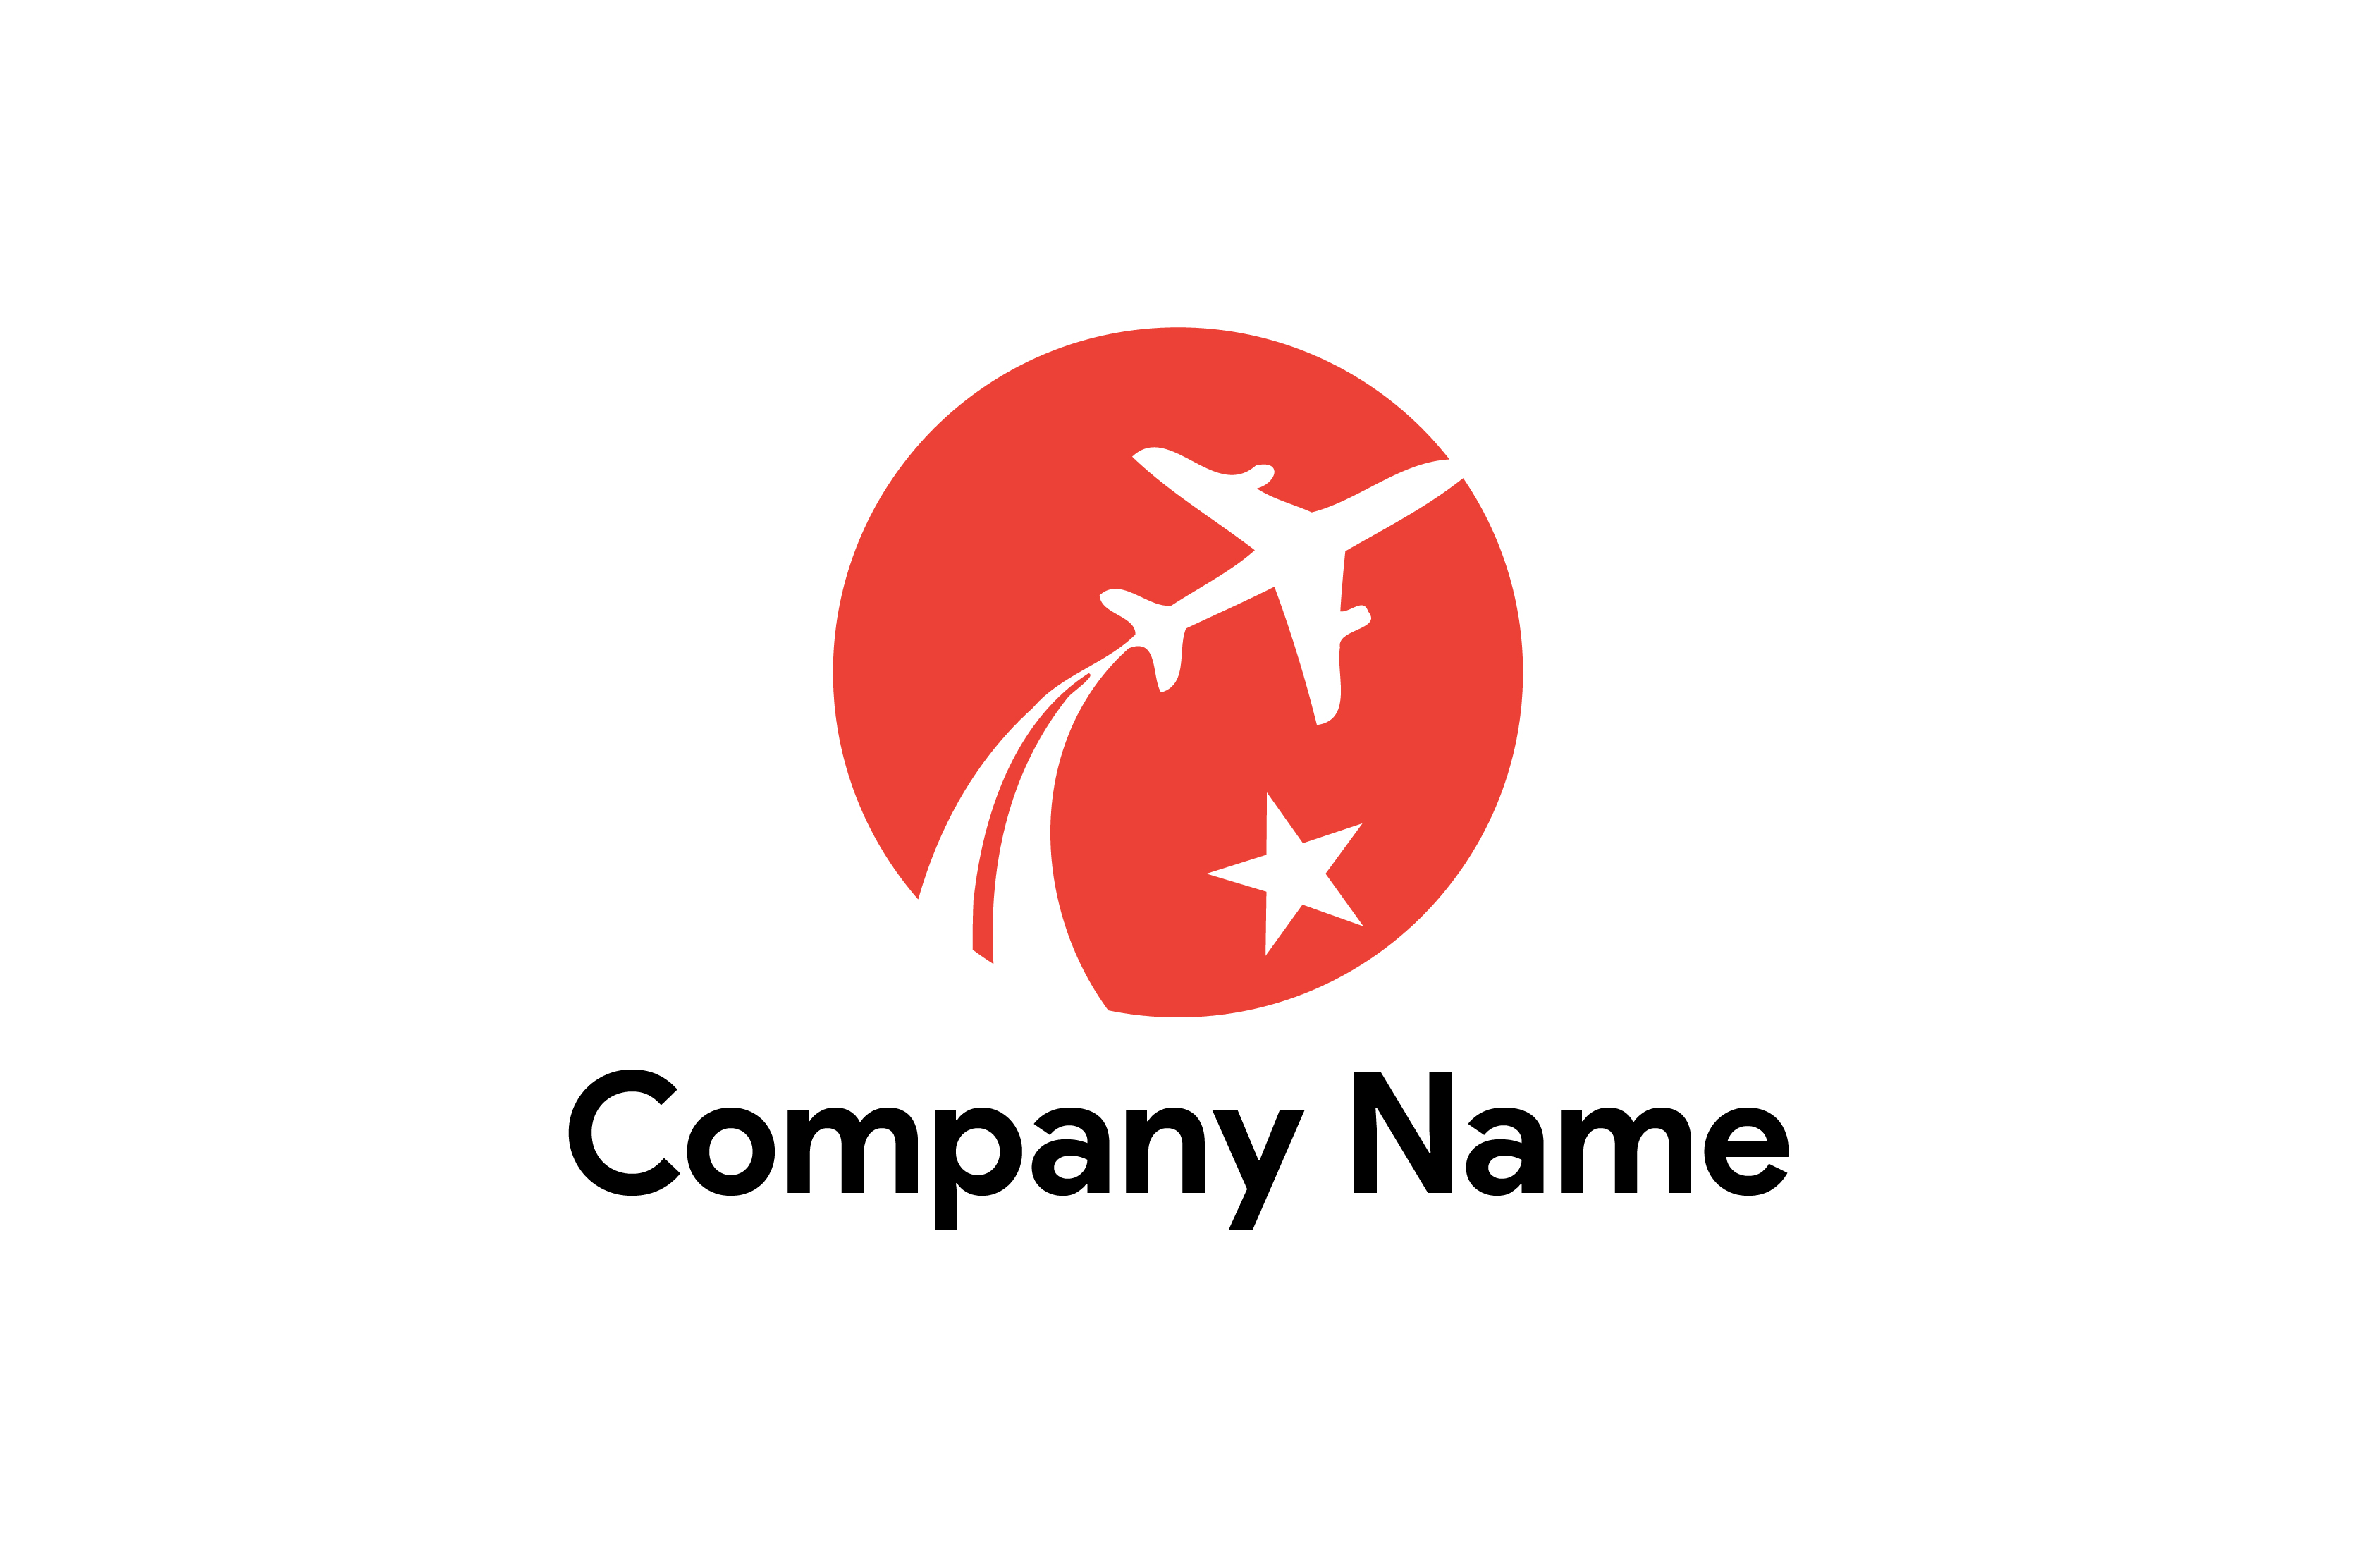 red airline logos and names